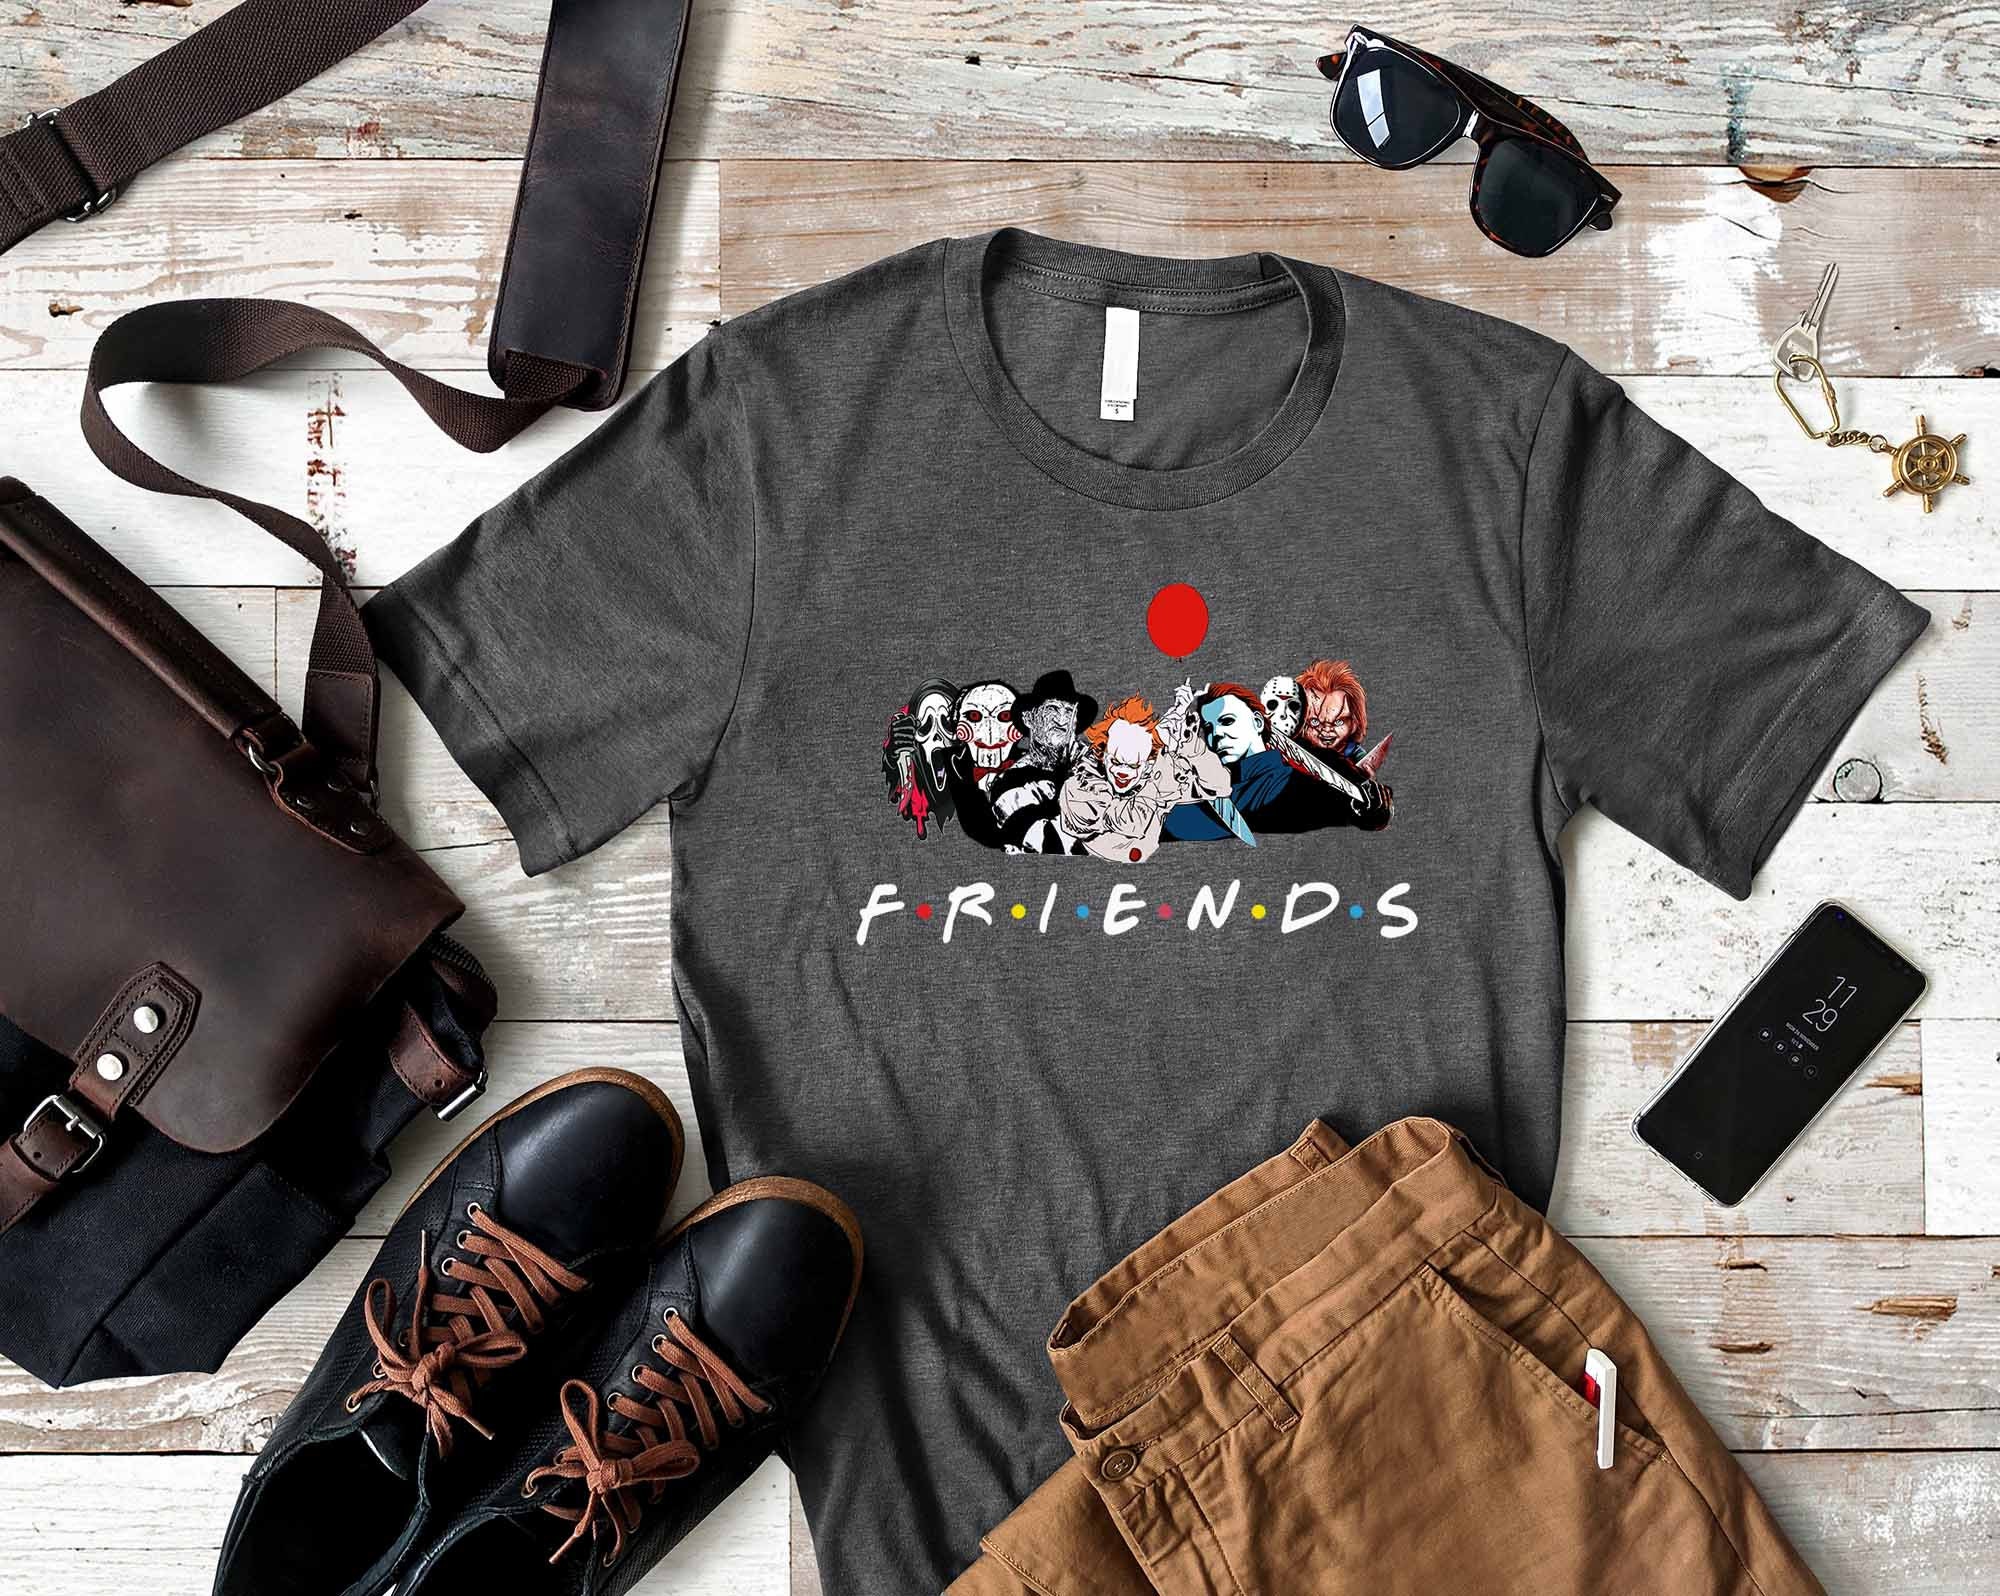 Discover Scary Friends Shirt, Halloween Horror Movie Killers, Friends Halloween Shirt, Scary Halloween Tees, Halloween T-Shirts, Horror Squad Shirt